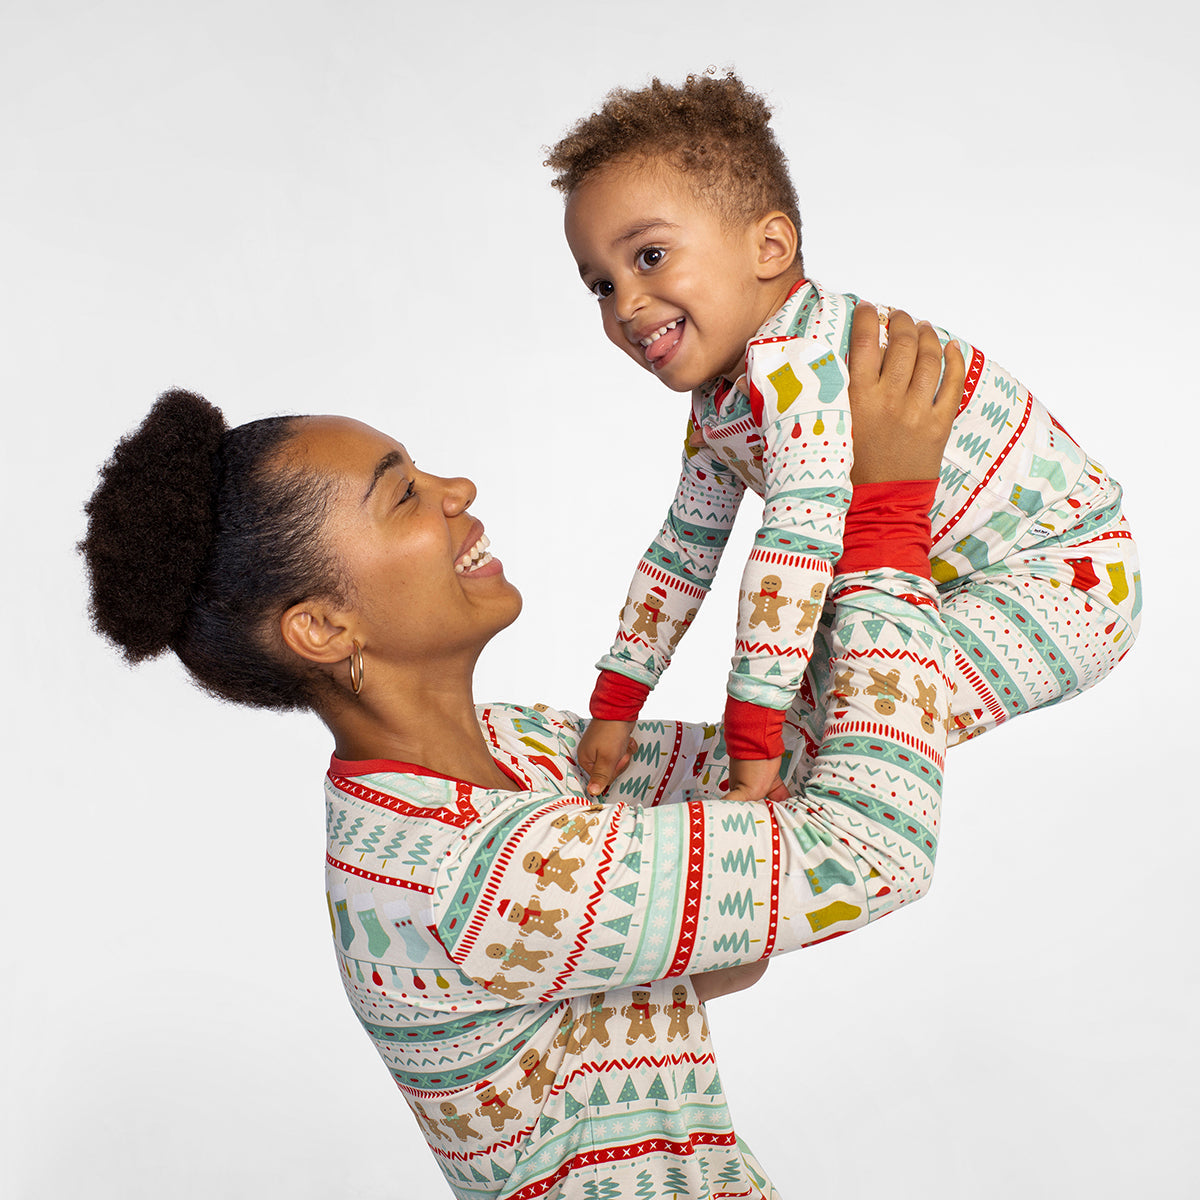 Mother is holding up her son wearing a women's Fair Isle pajama top. Her son is matching wearing a Fair Isle zippy